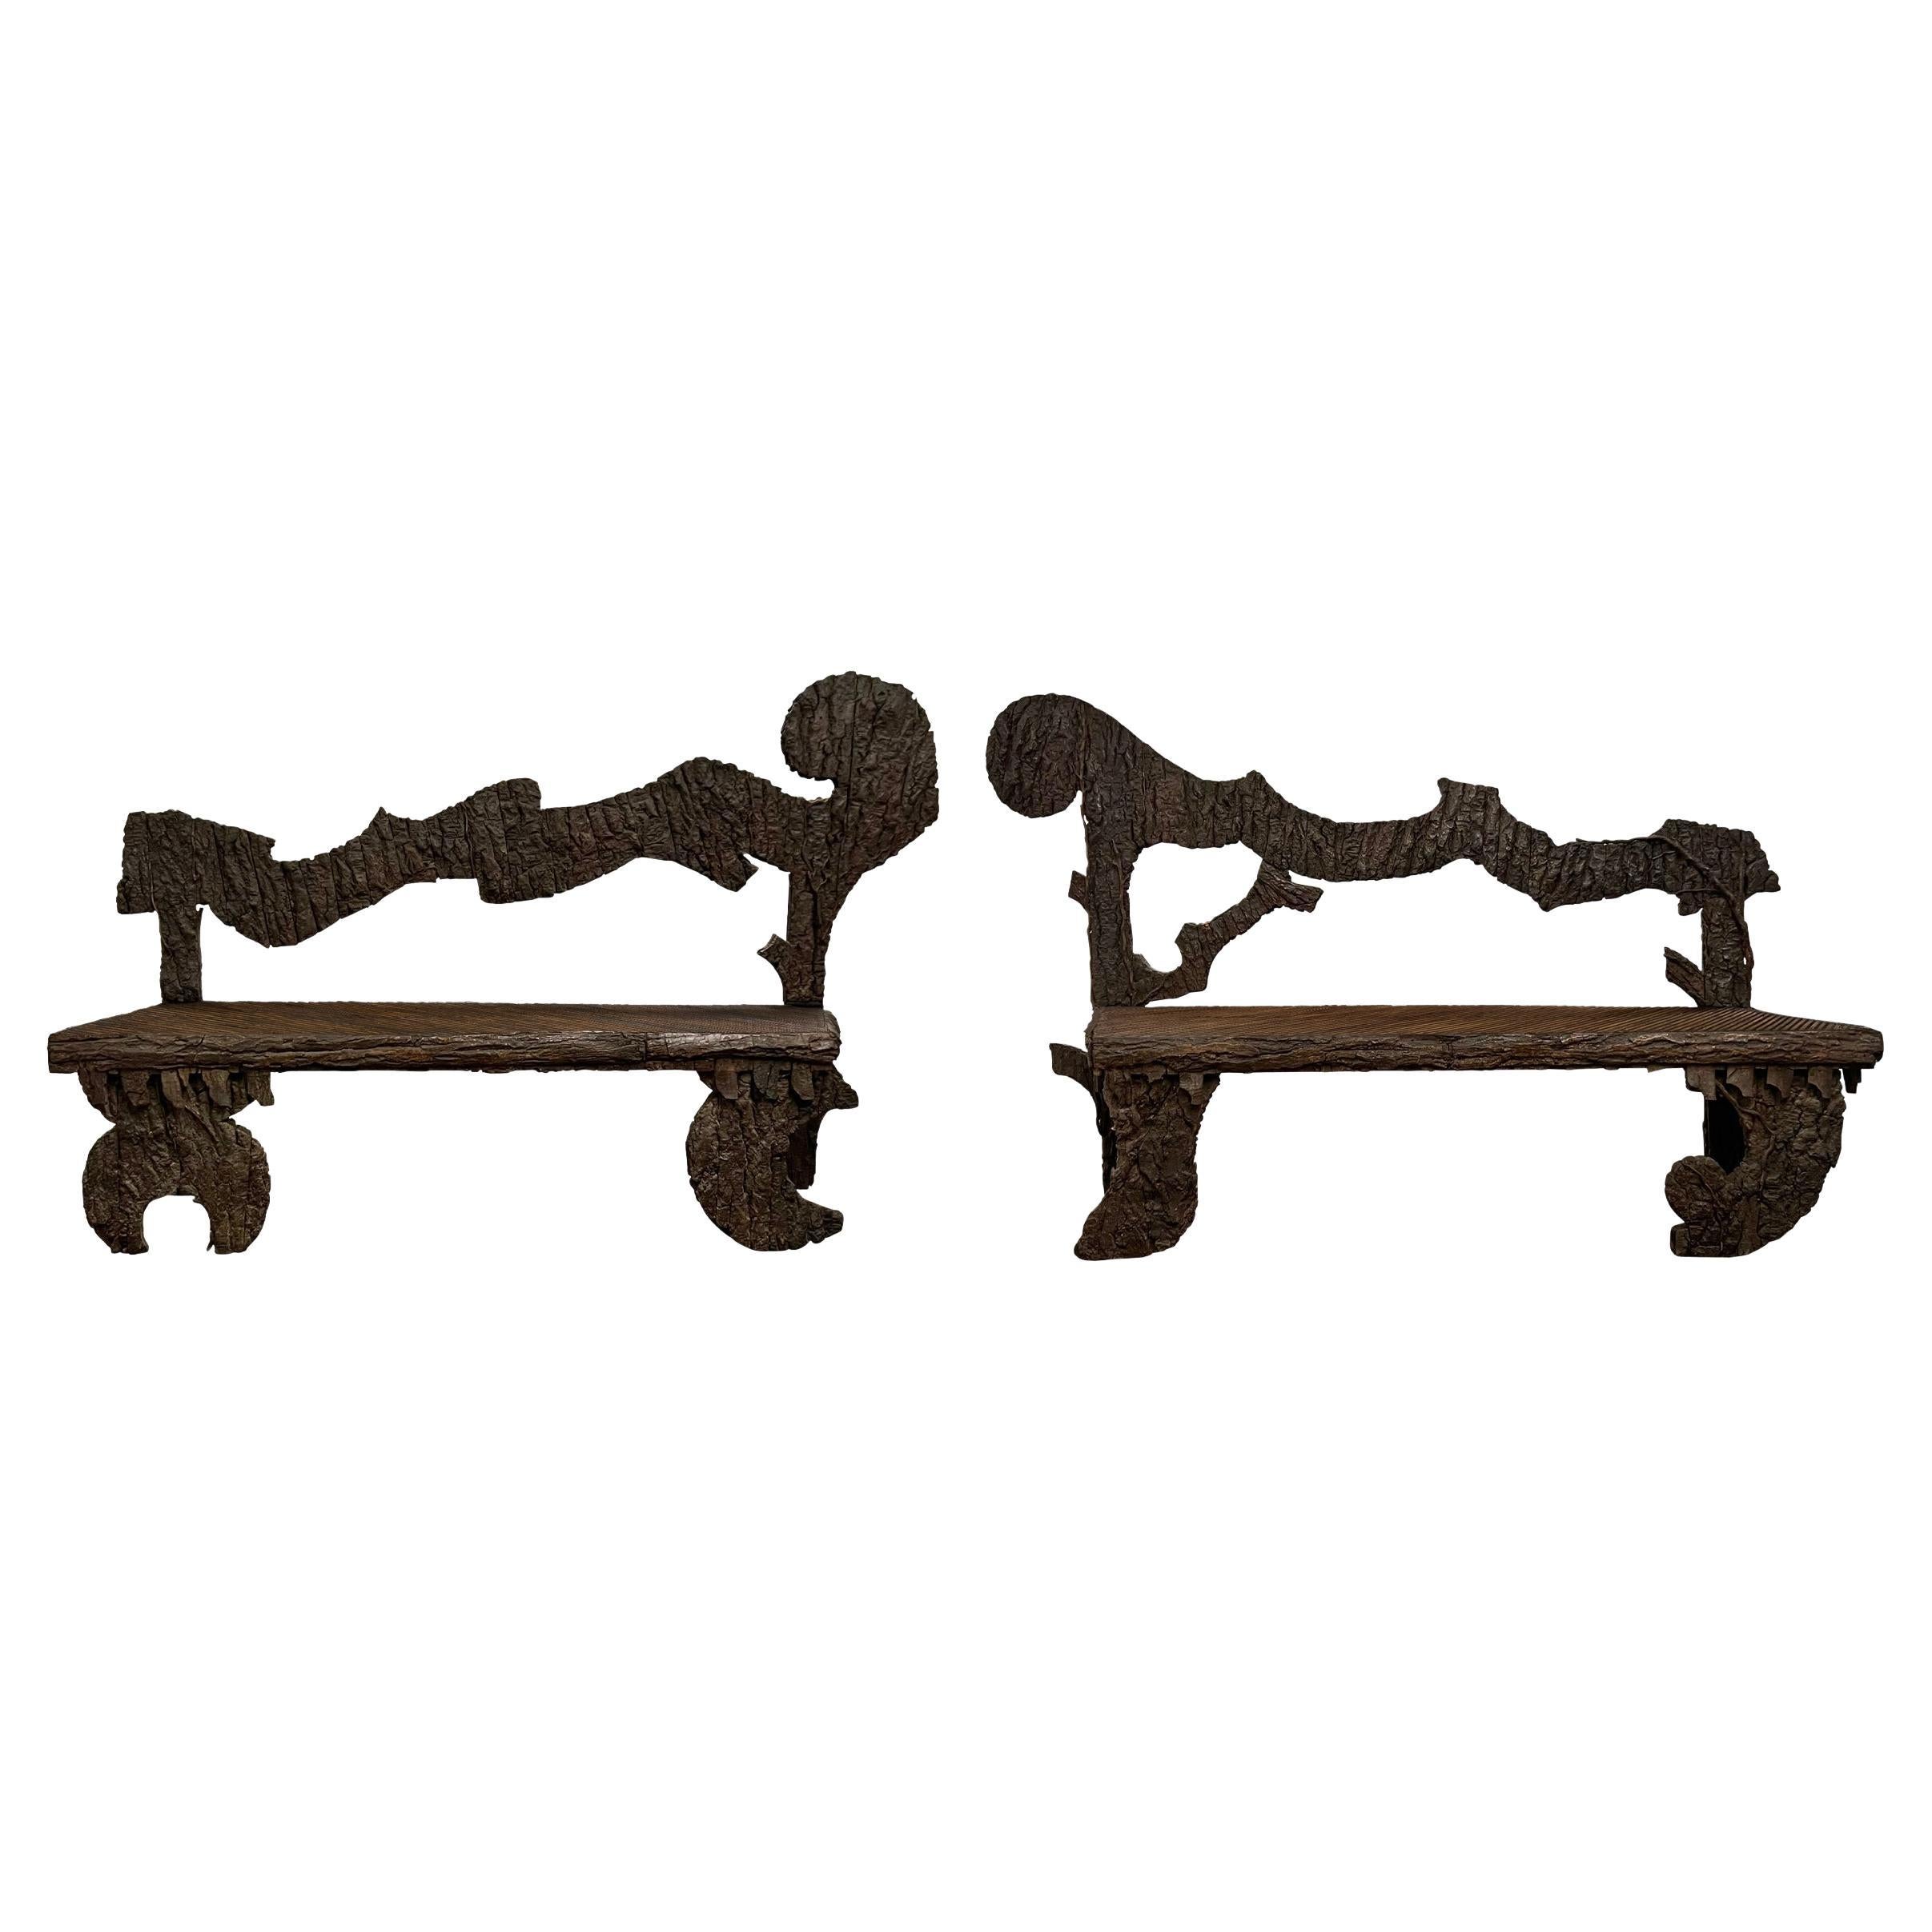 Pair of Early 20th Century Italian Benches from a Tyrolean Chalet